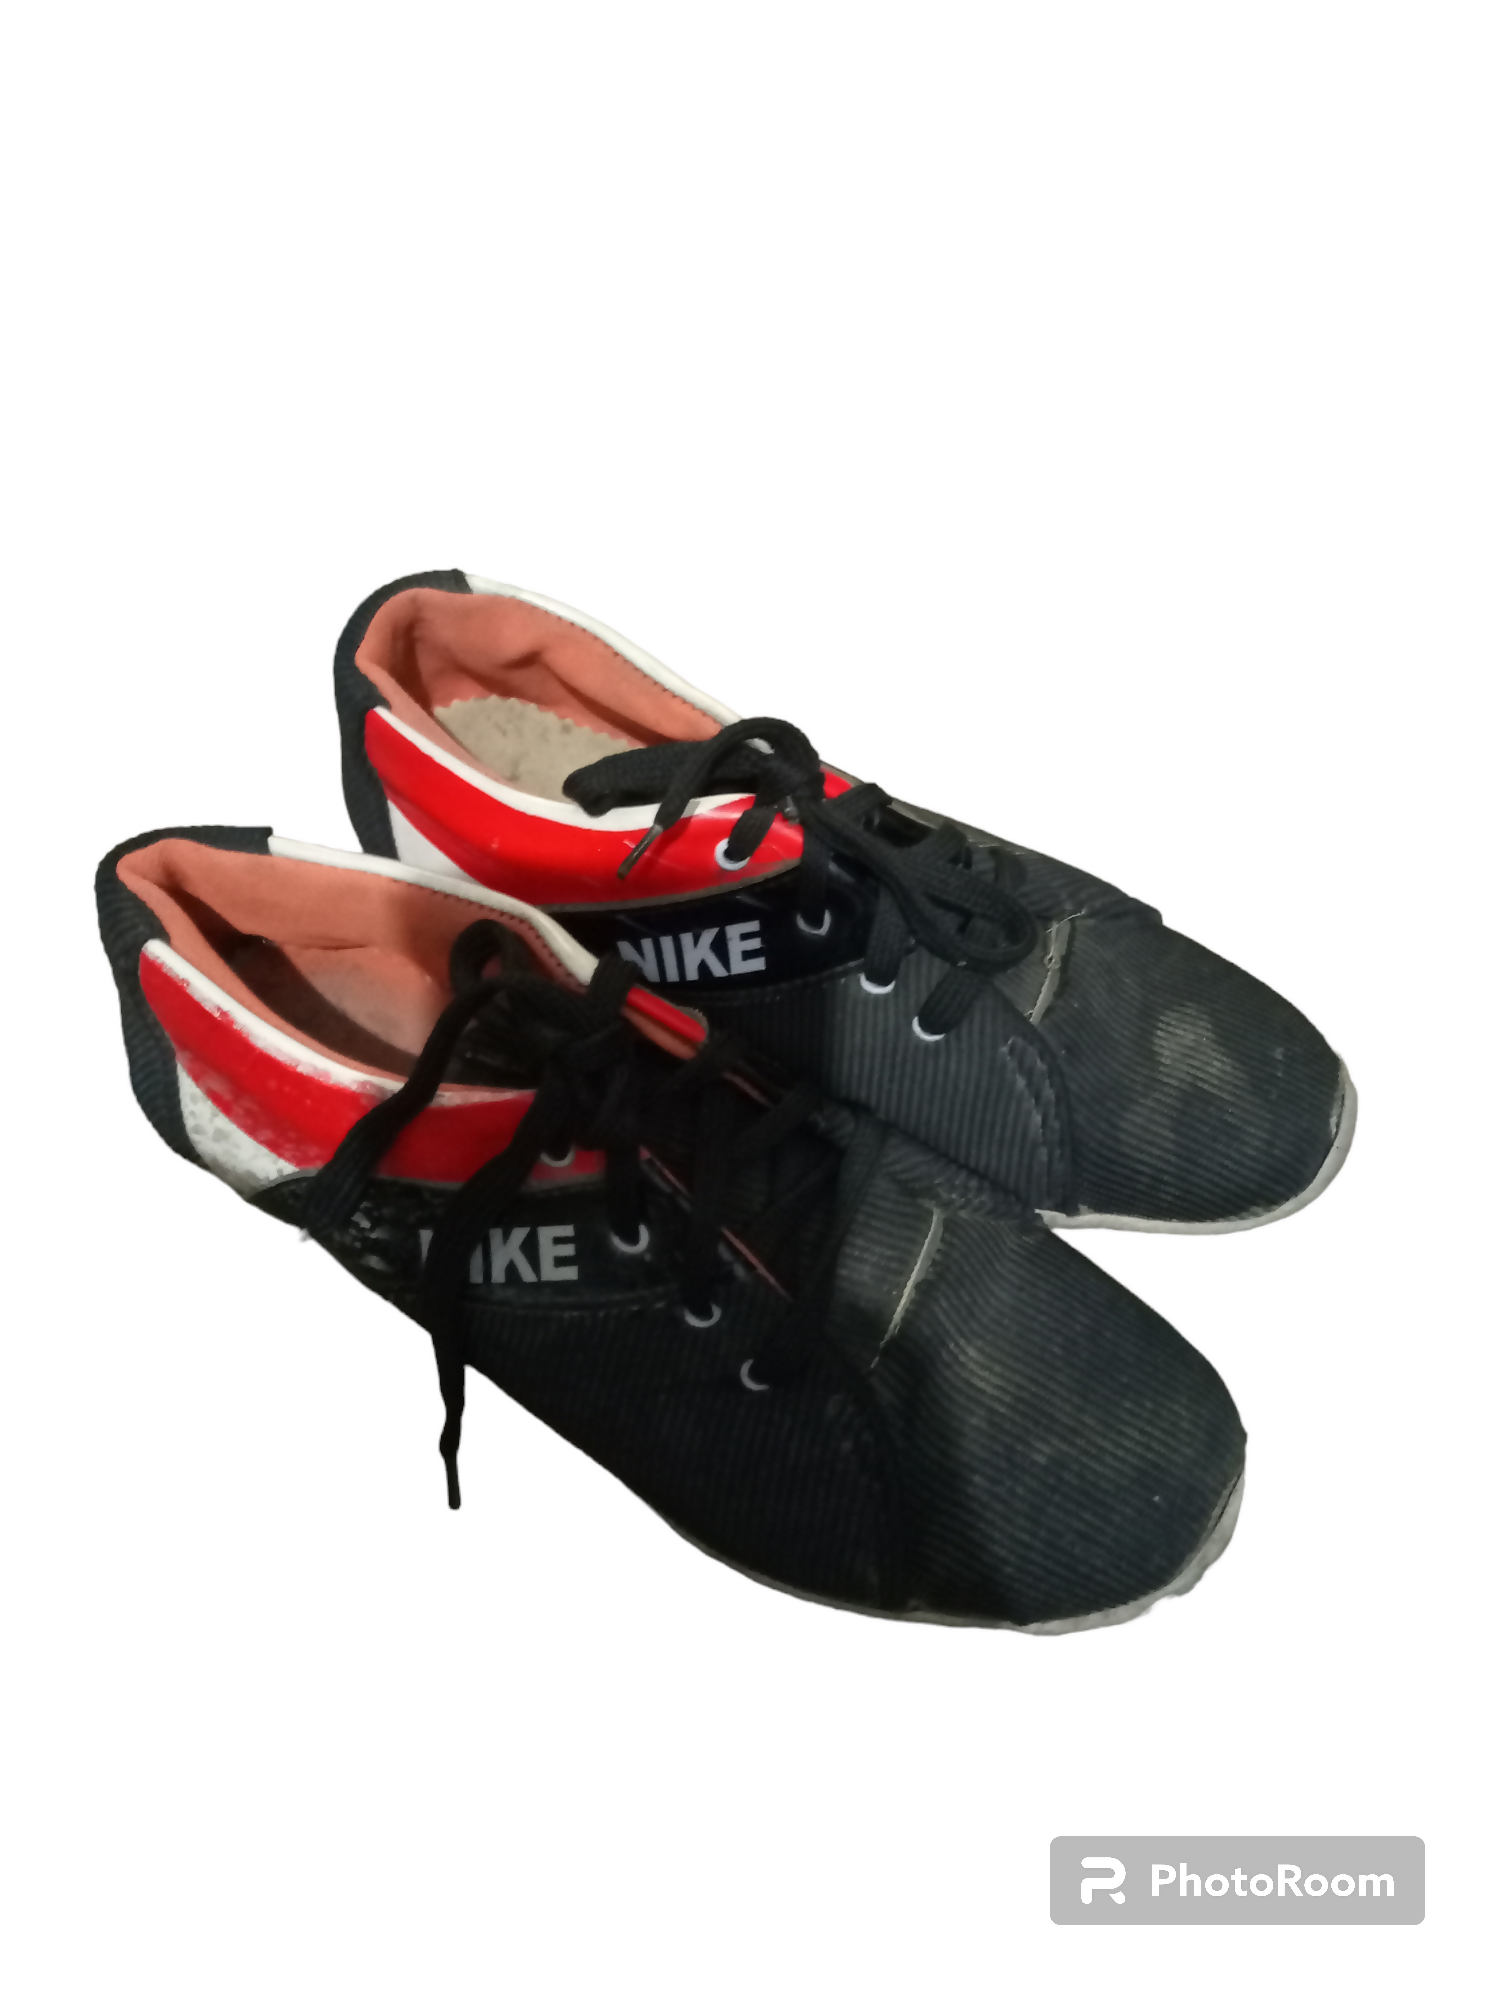 Snikers for kids | Shoes & Accessories | Preloved